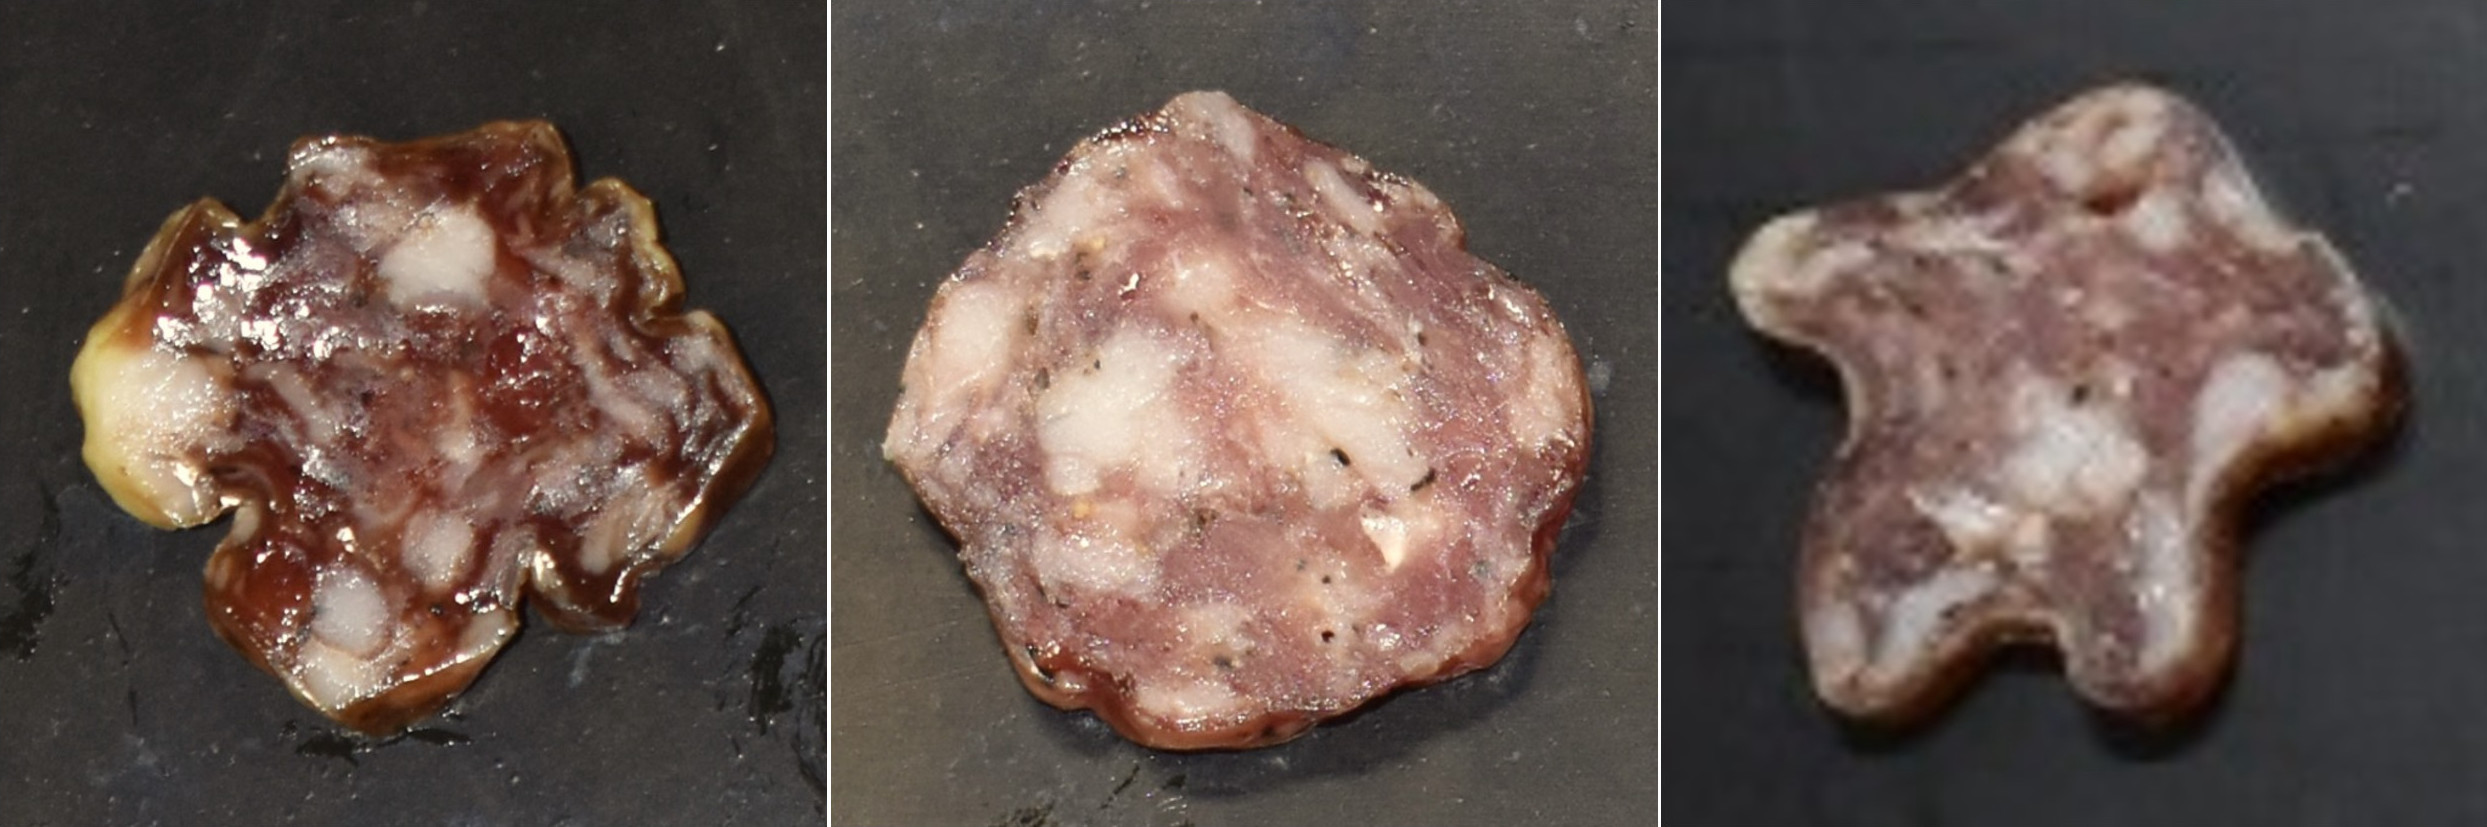 Nitrate- and nitrite-free dry cured salami produced with the addition of ZnPP-producing LAB (center) compared salami containing nitrates and nitrites (left) and nitrate- and nitrite-free salami (right). (Photos courtesy of Air Water Inc.)